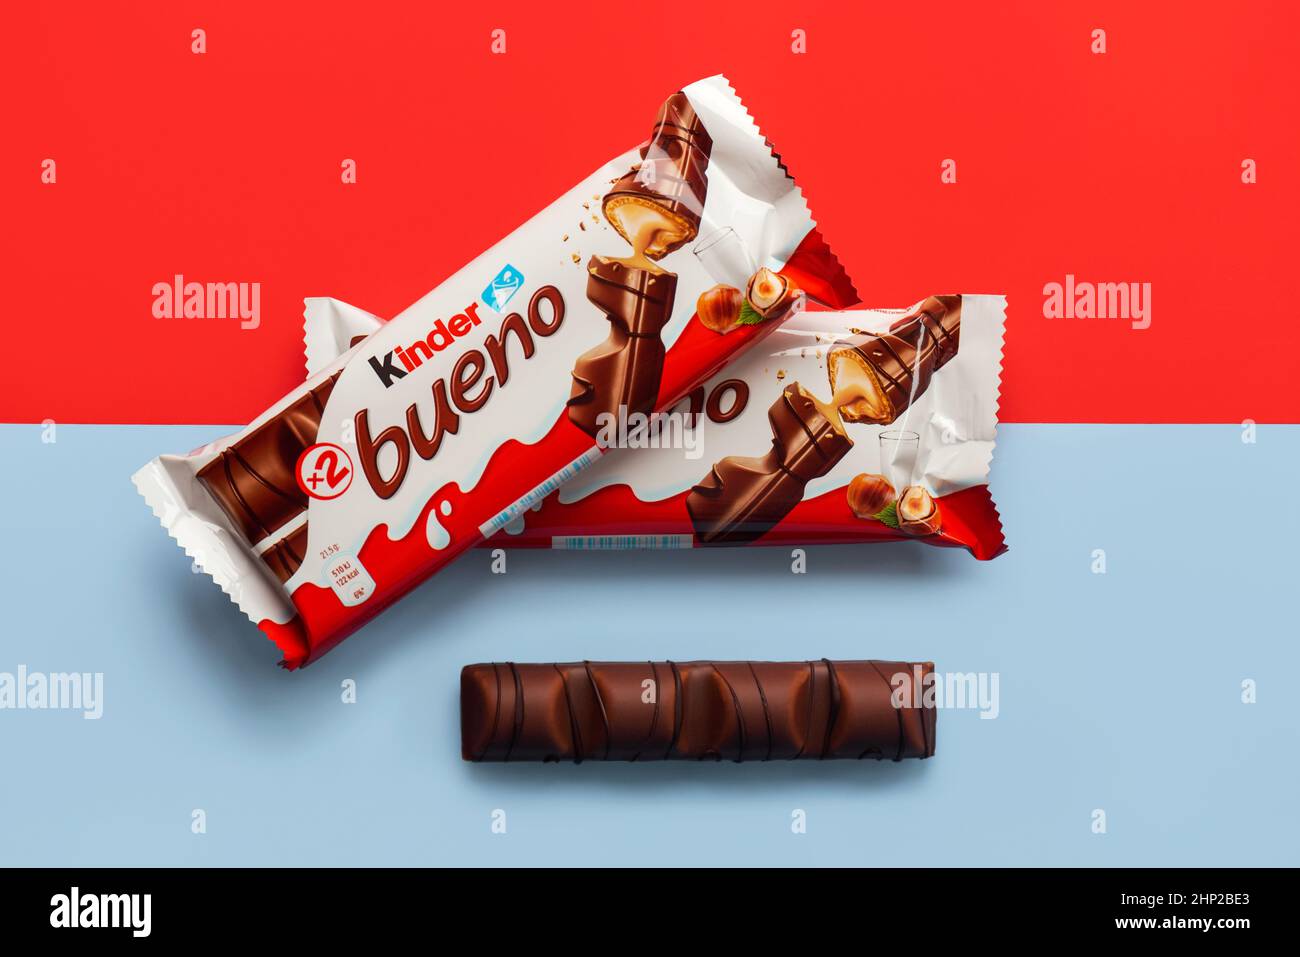 Closeup of packages of Kinder bueno and Kinder Bueno milk chocolate bar over red and blue background Stock Photo